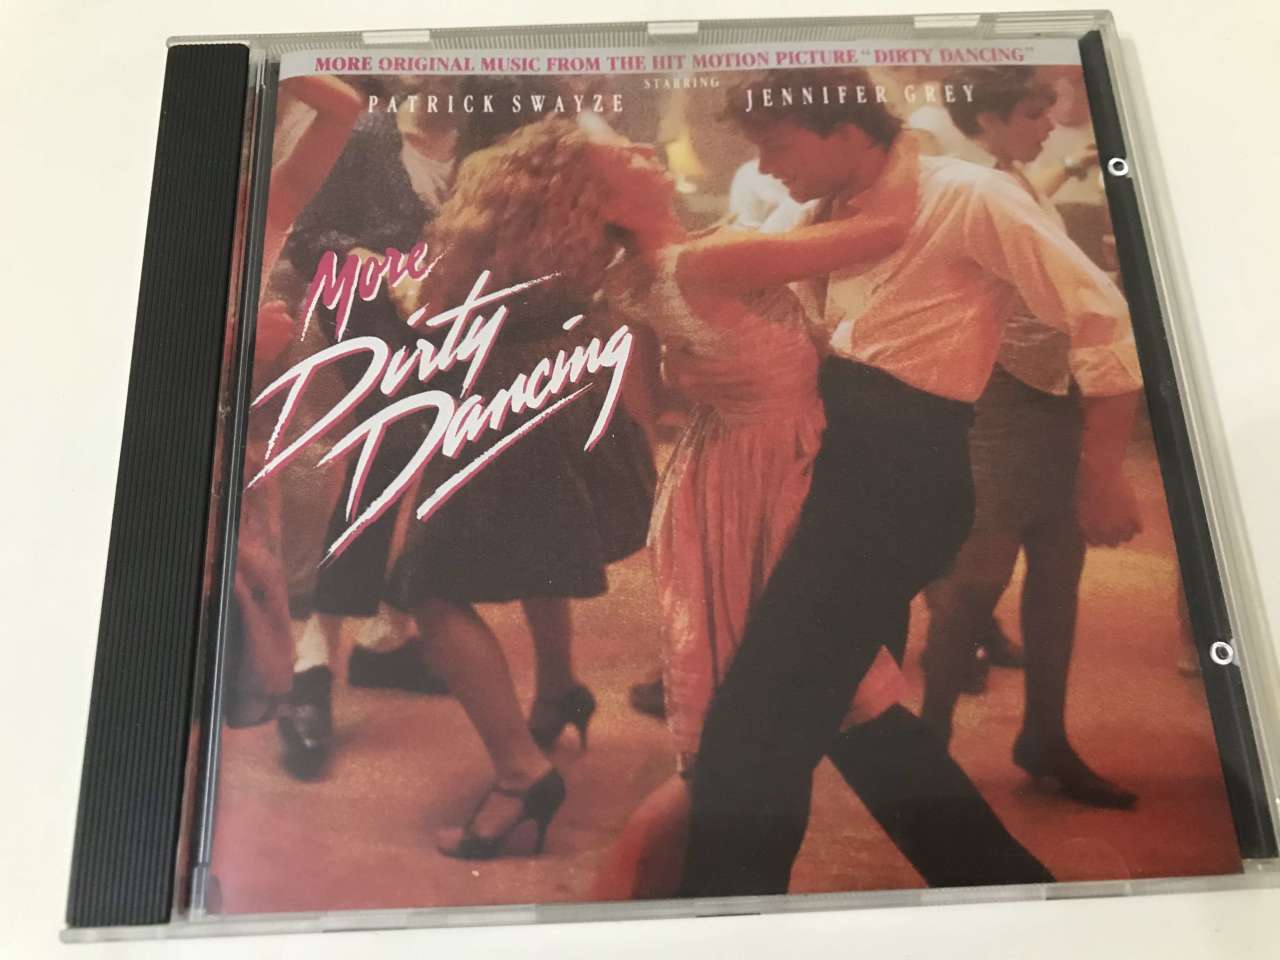 More Dirty Dancing (More Original Music From The Hit Motion Picture ''Dirty Dancing'')